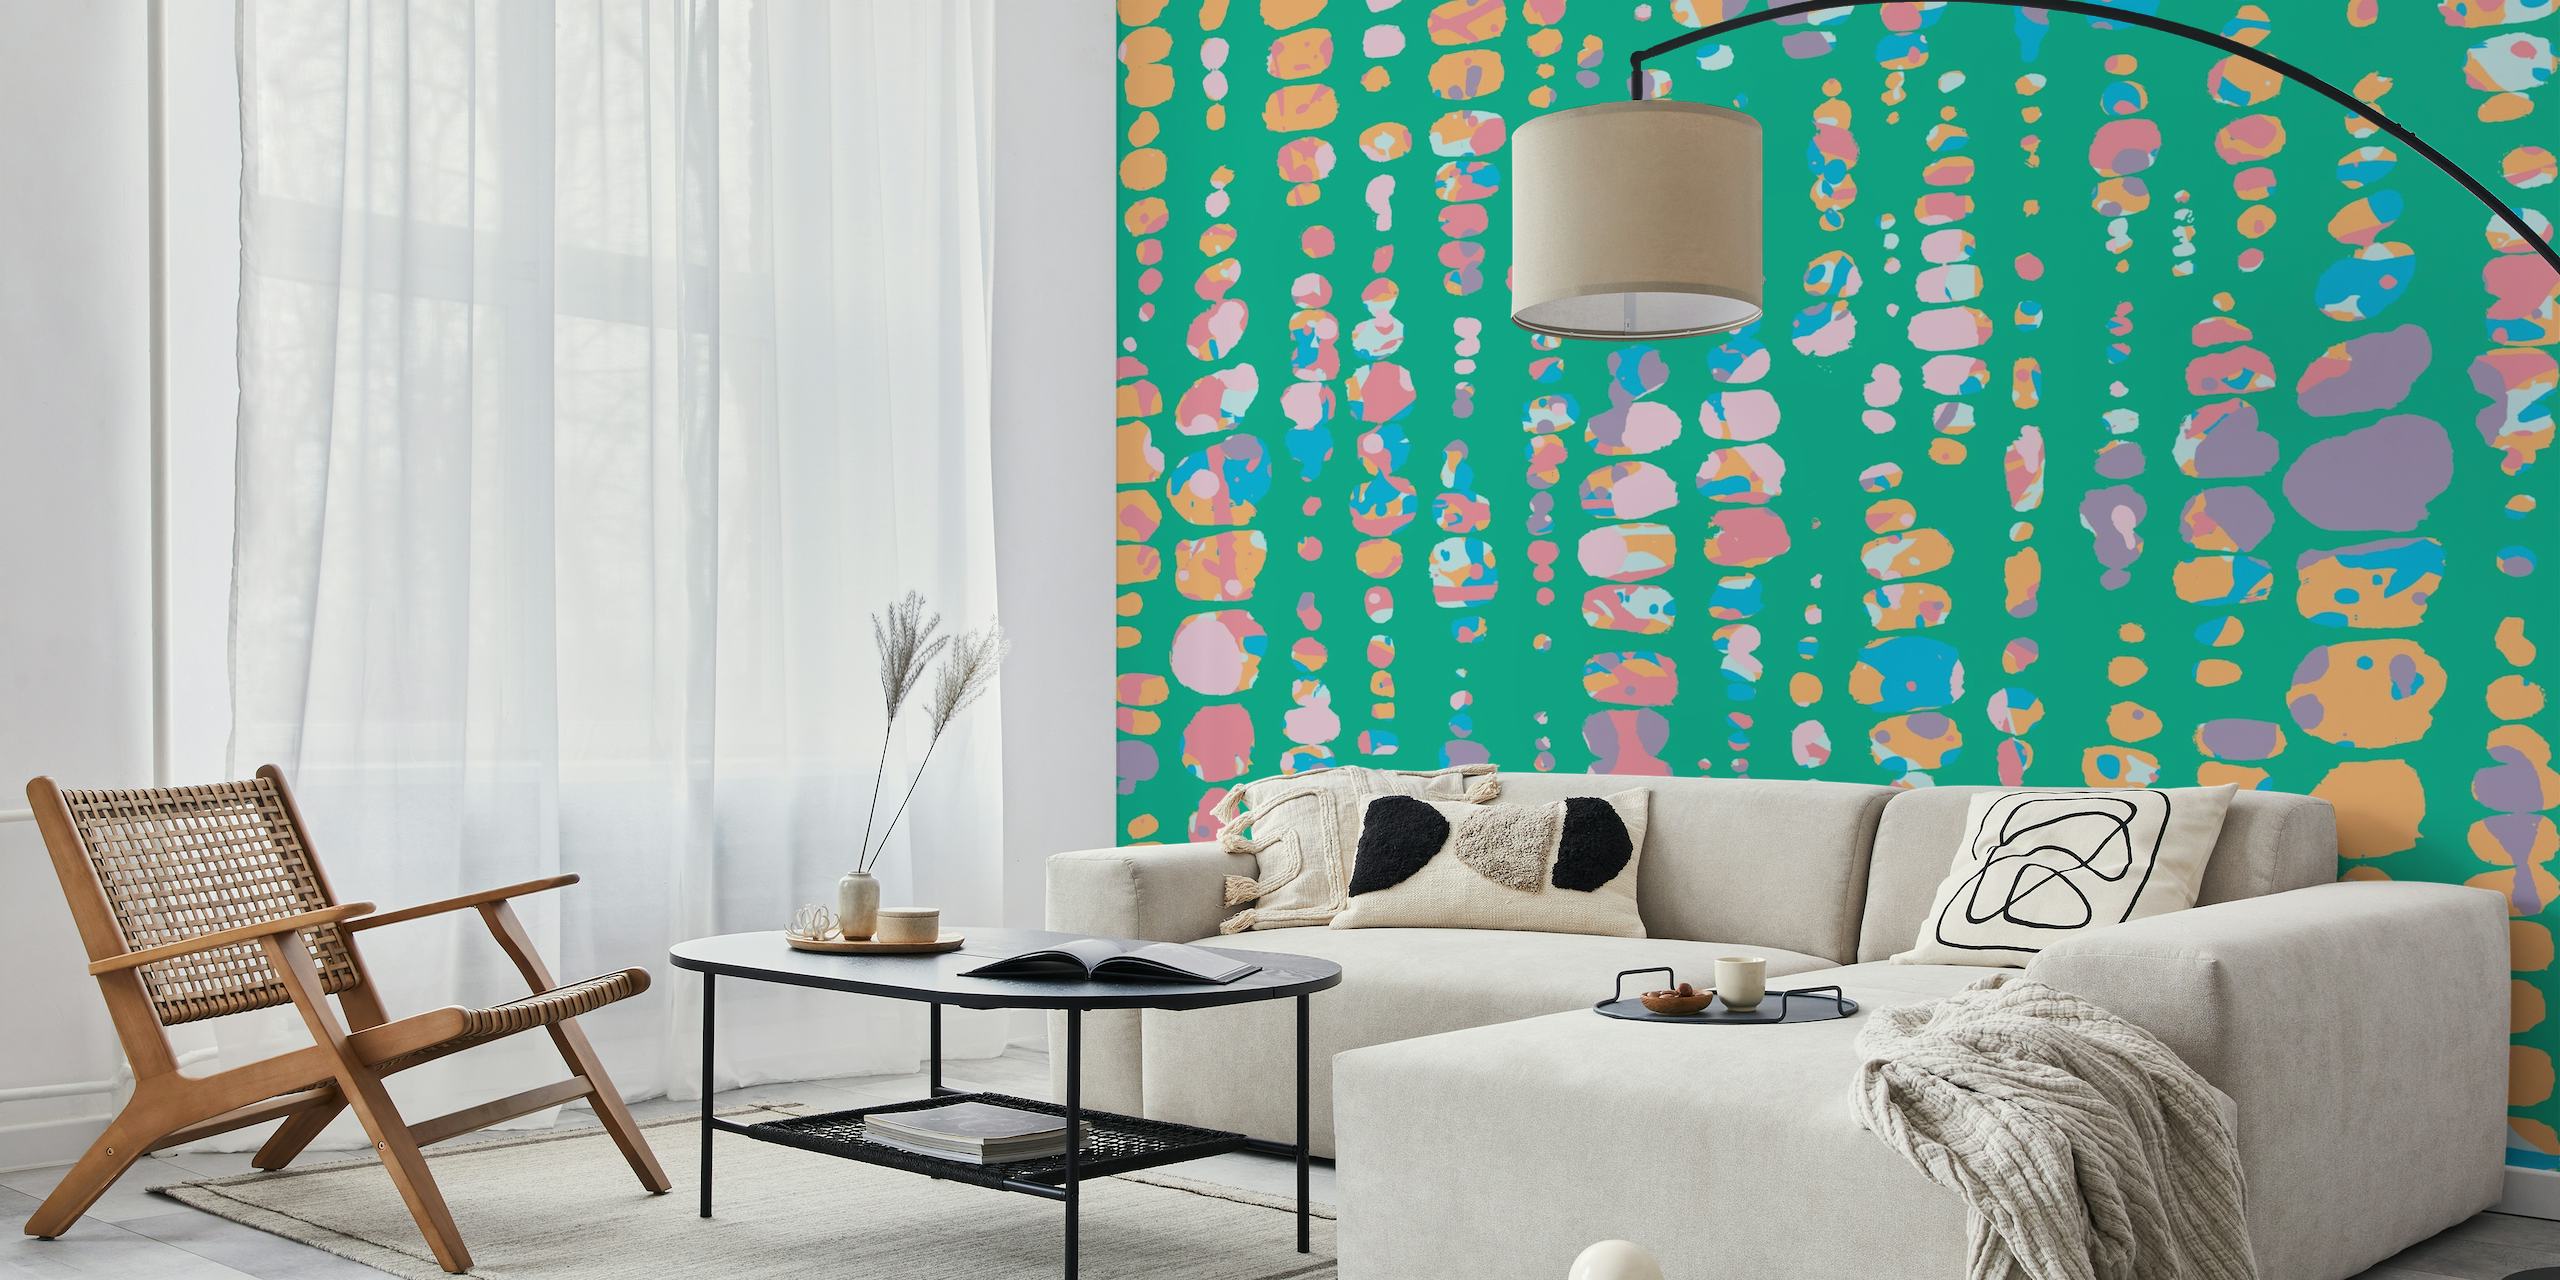 Impressionist-style wall mural with aqua, teal, coral, and pink dabs resembling Monet's Water Lilies